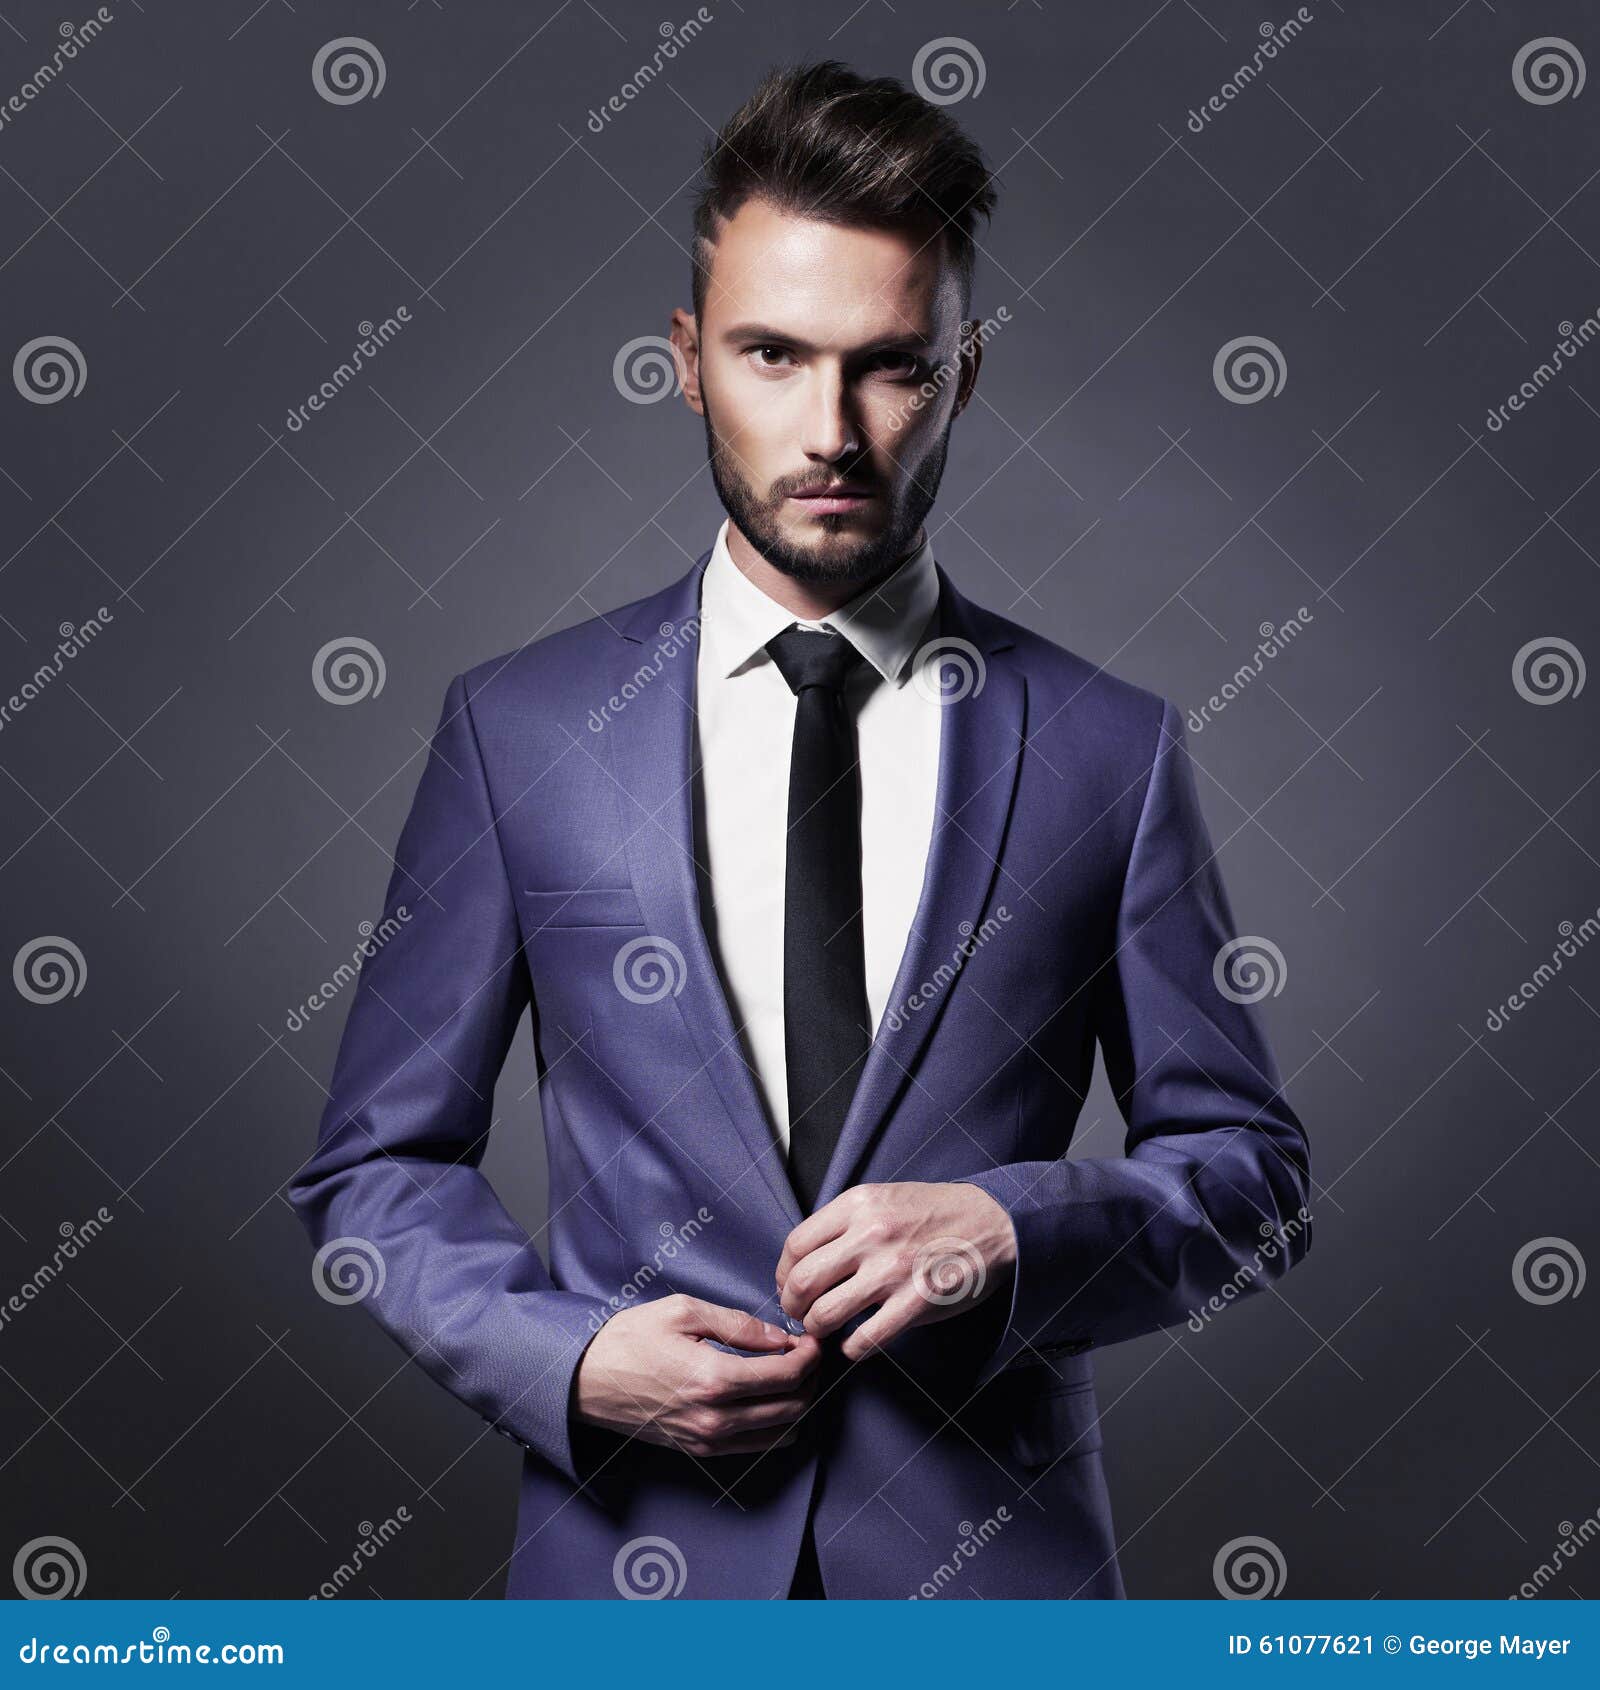 Handsome Stylish Man in Blue Suit Stock Image - Image of confidence ...